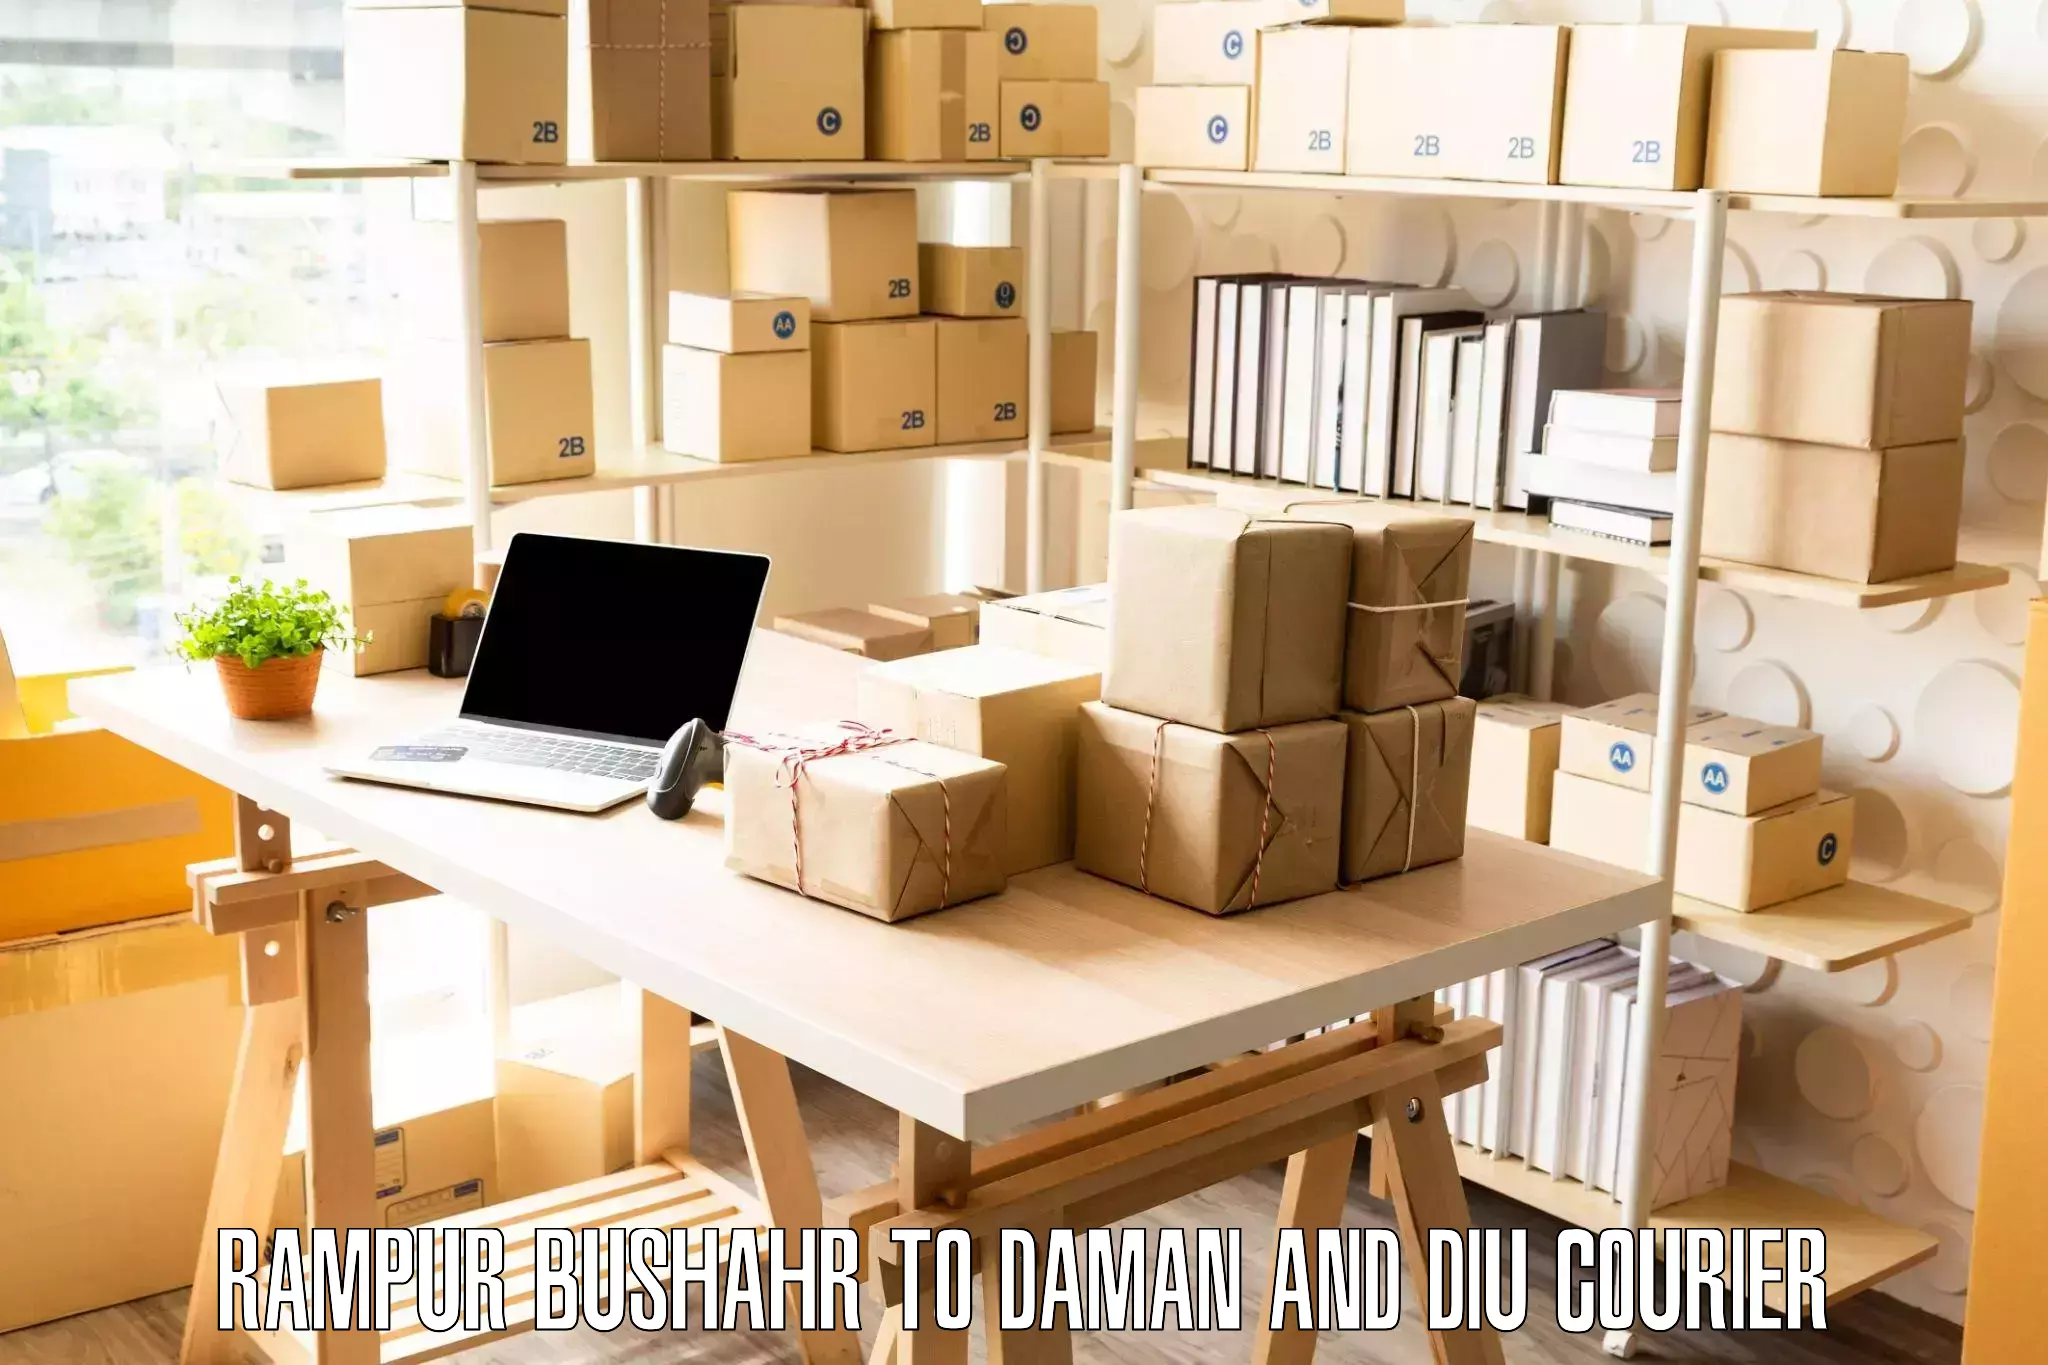 Reliable furniture movers Rampur Bushahr to Daman and Diu